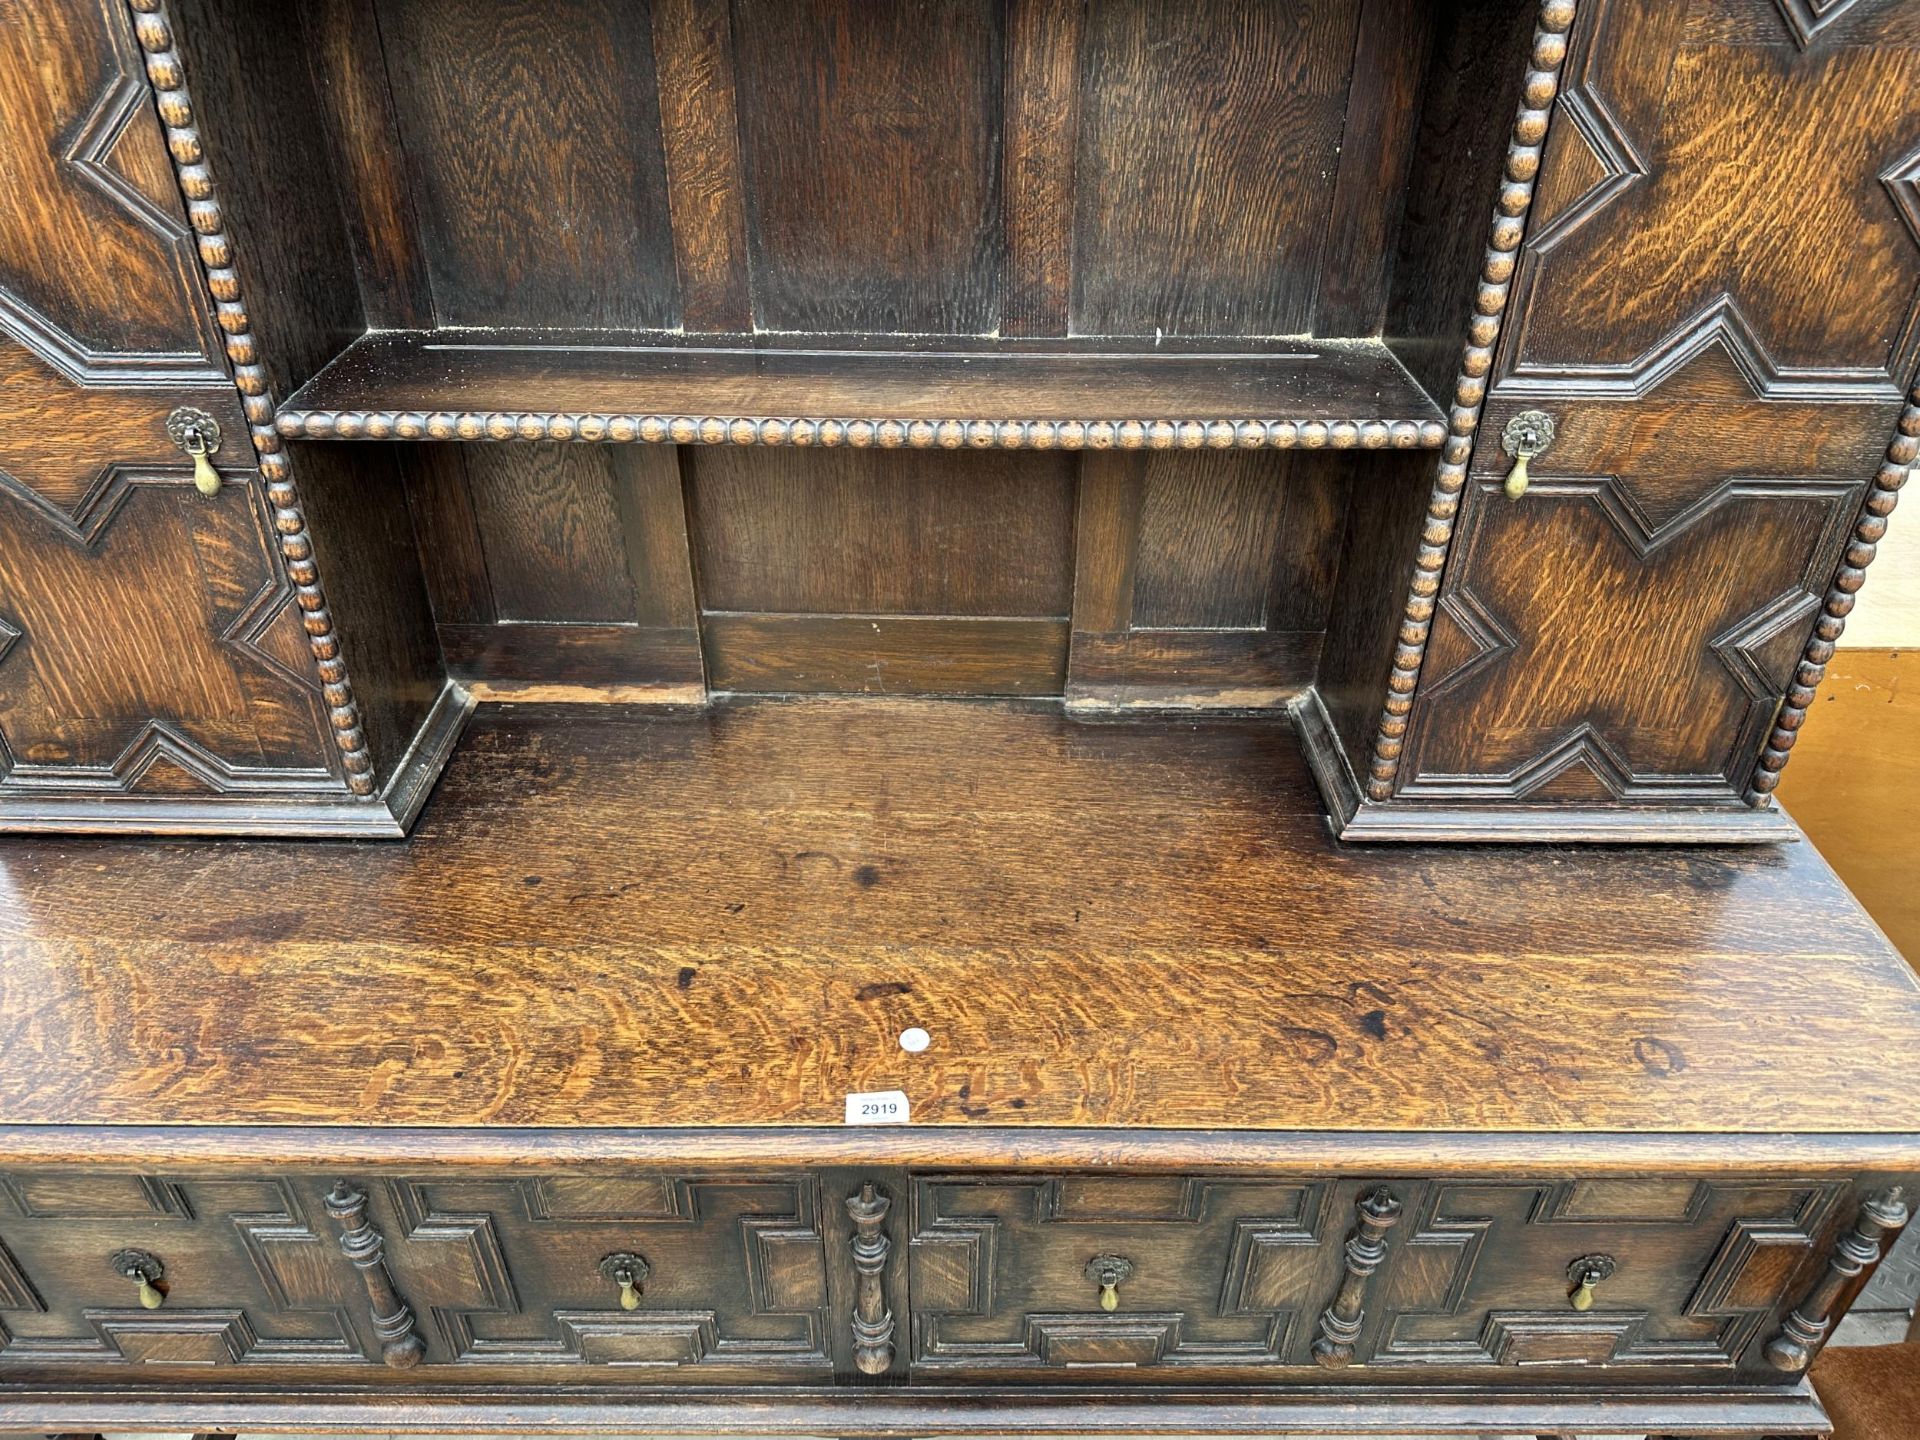 AN OAK JACOBEAN STYLE DRESSER WITH TWO FOLD-D0WN COMPARTMENTS AND A PLATE RACK ENCLOSING CUPBOARD - Image 3 of 7